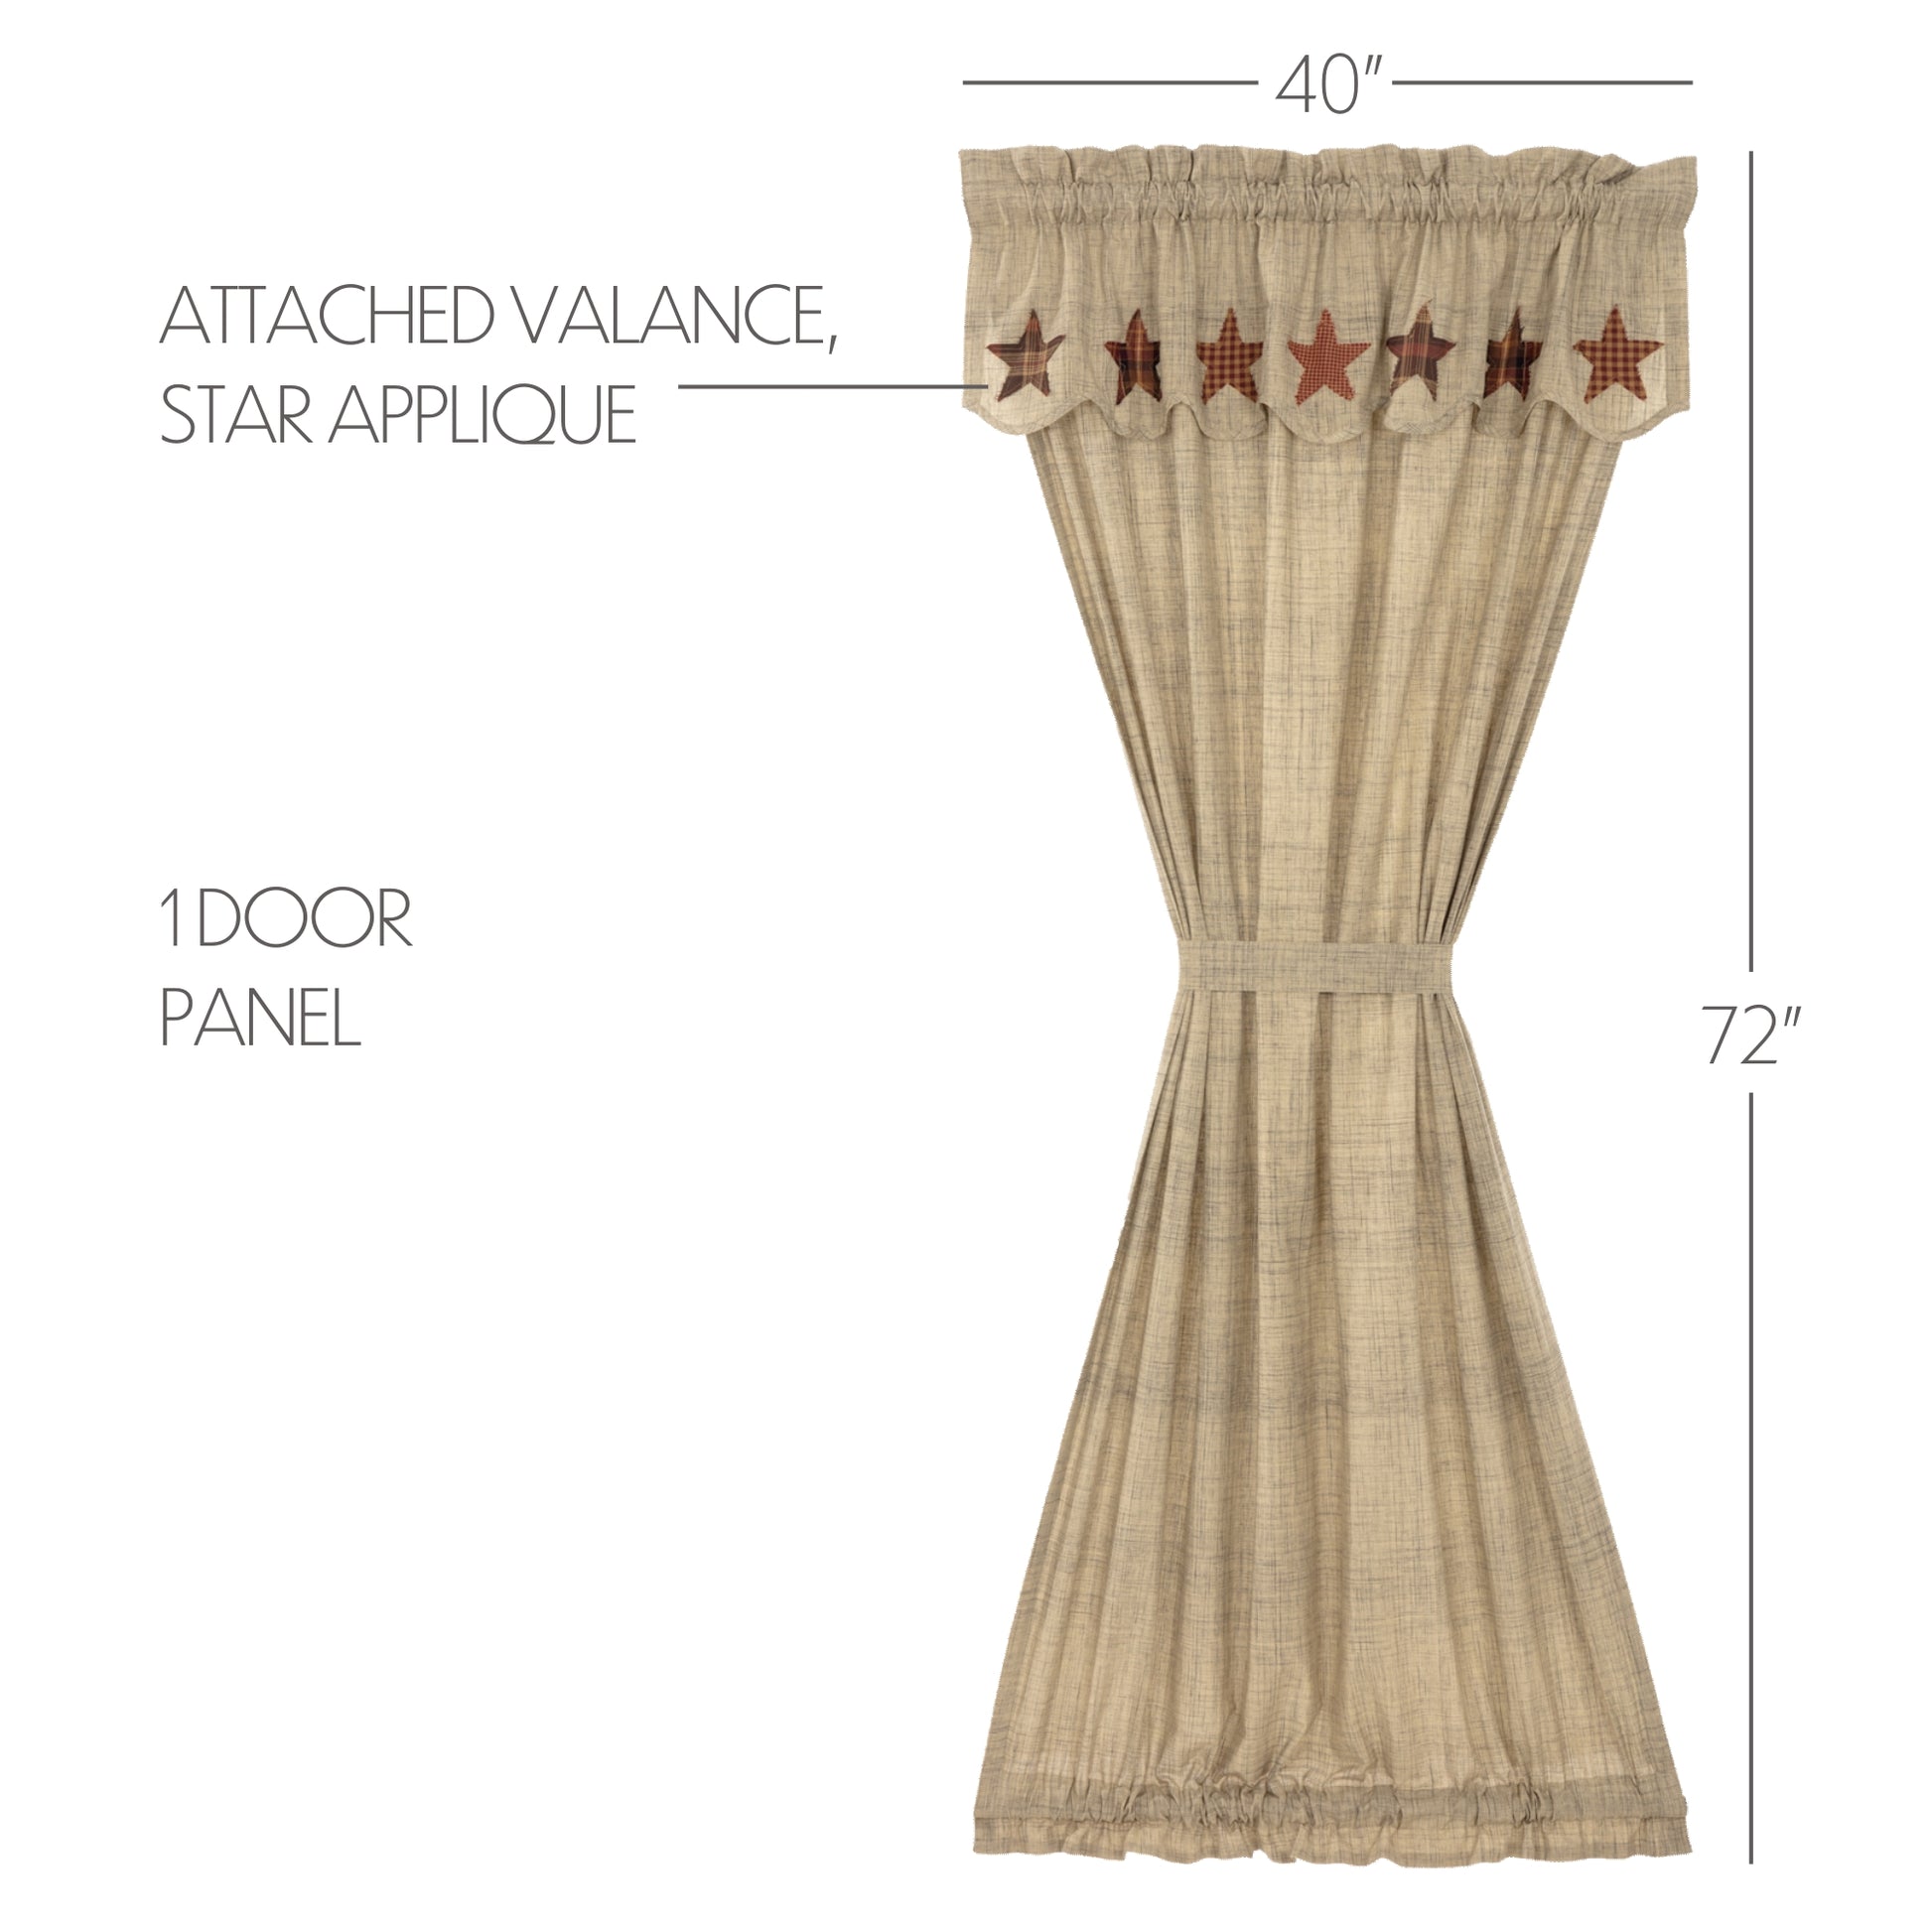 50804-Abilene-Star-Door-Panel-with-Attached-Valance-72x40-image-1